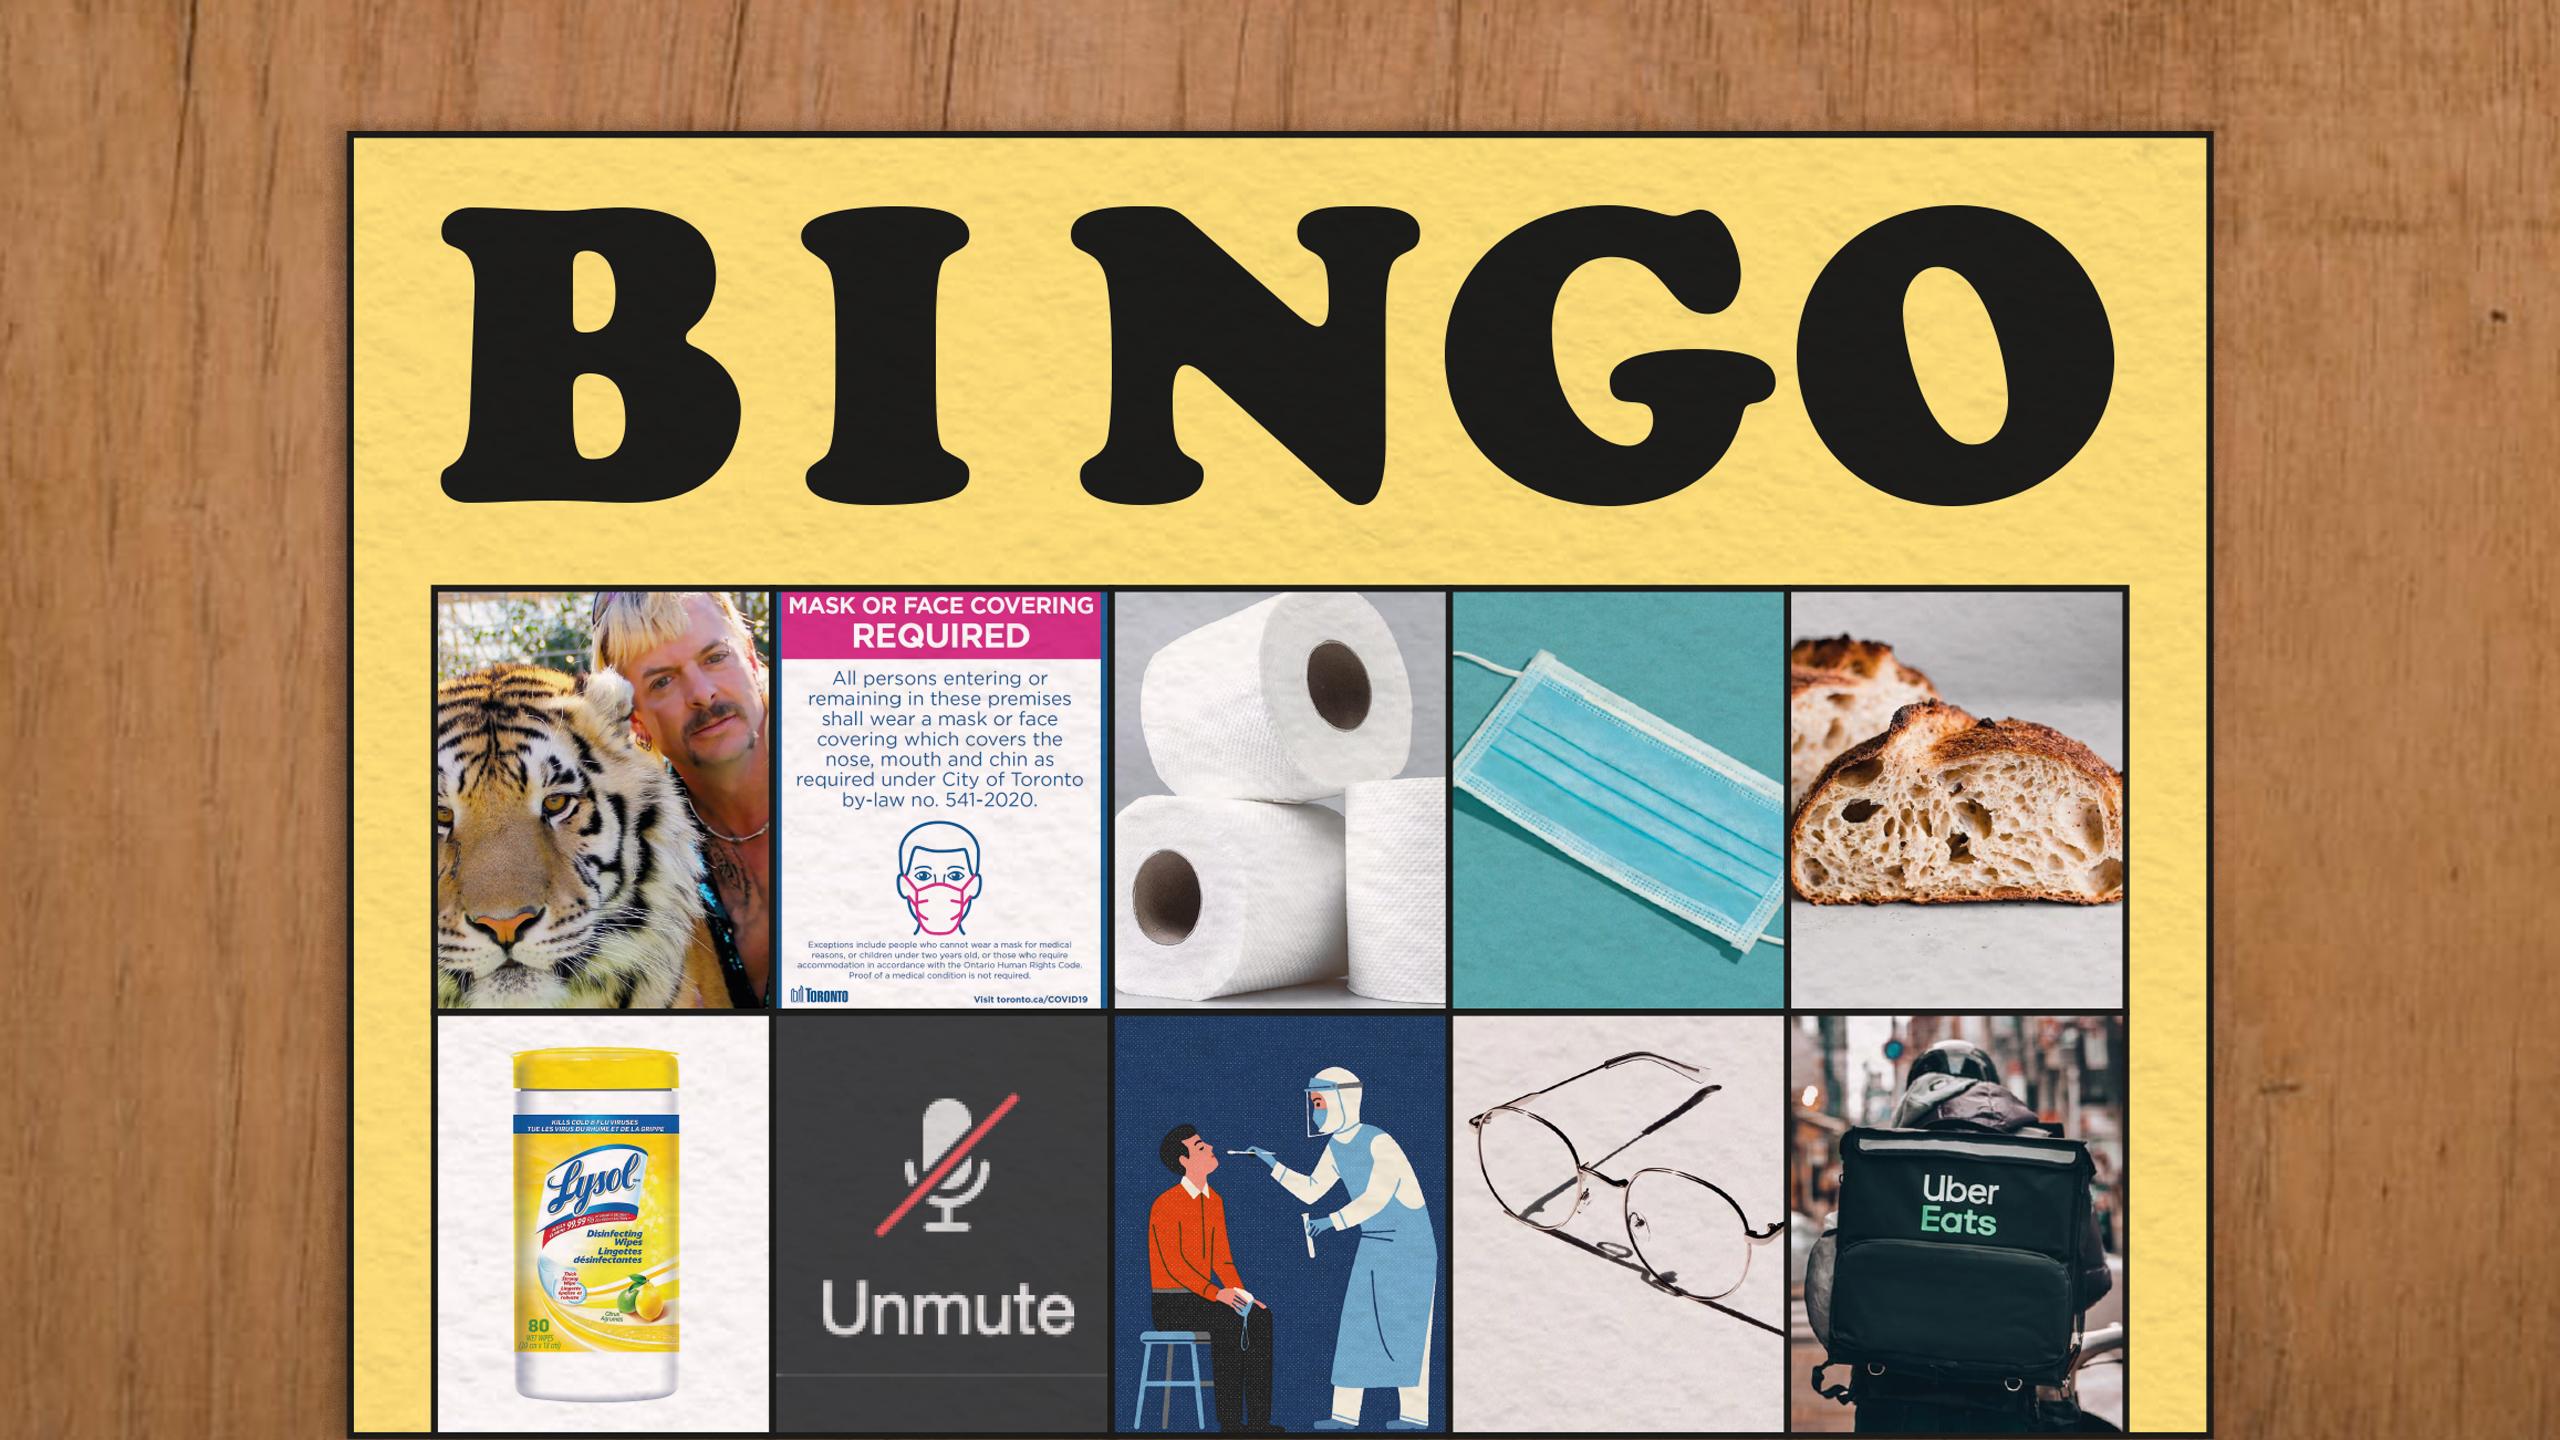 Bingo card with ten squares showing images of Joe exotic, a mandatory mask sign, toilet roll, a mask, sourdough loaf, Lysol wipes, the Zoom unmute button, a person having a COVID-19 test, a pair of glasses, and the Uber Eats logo